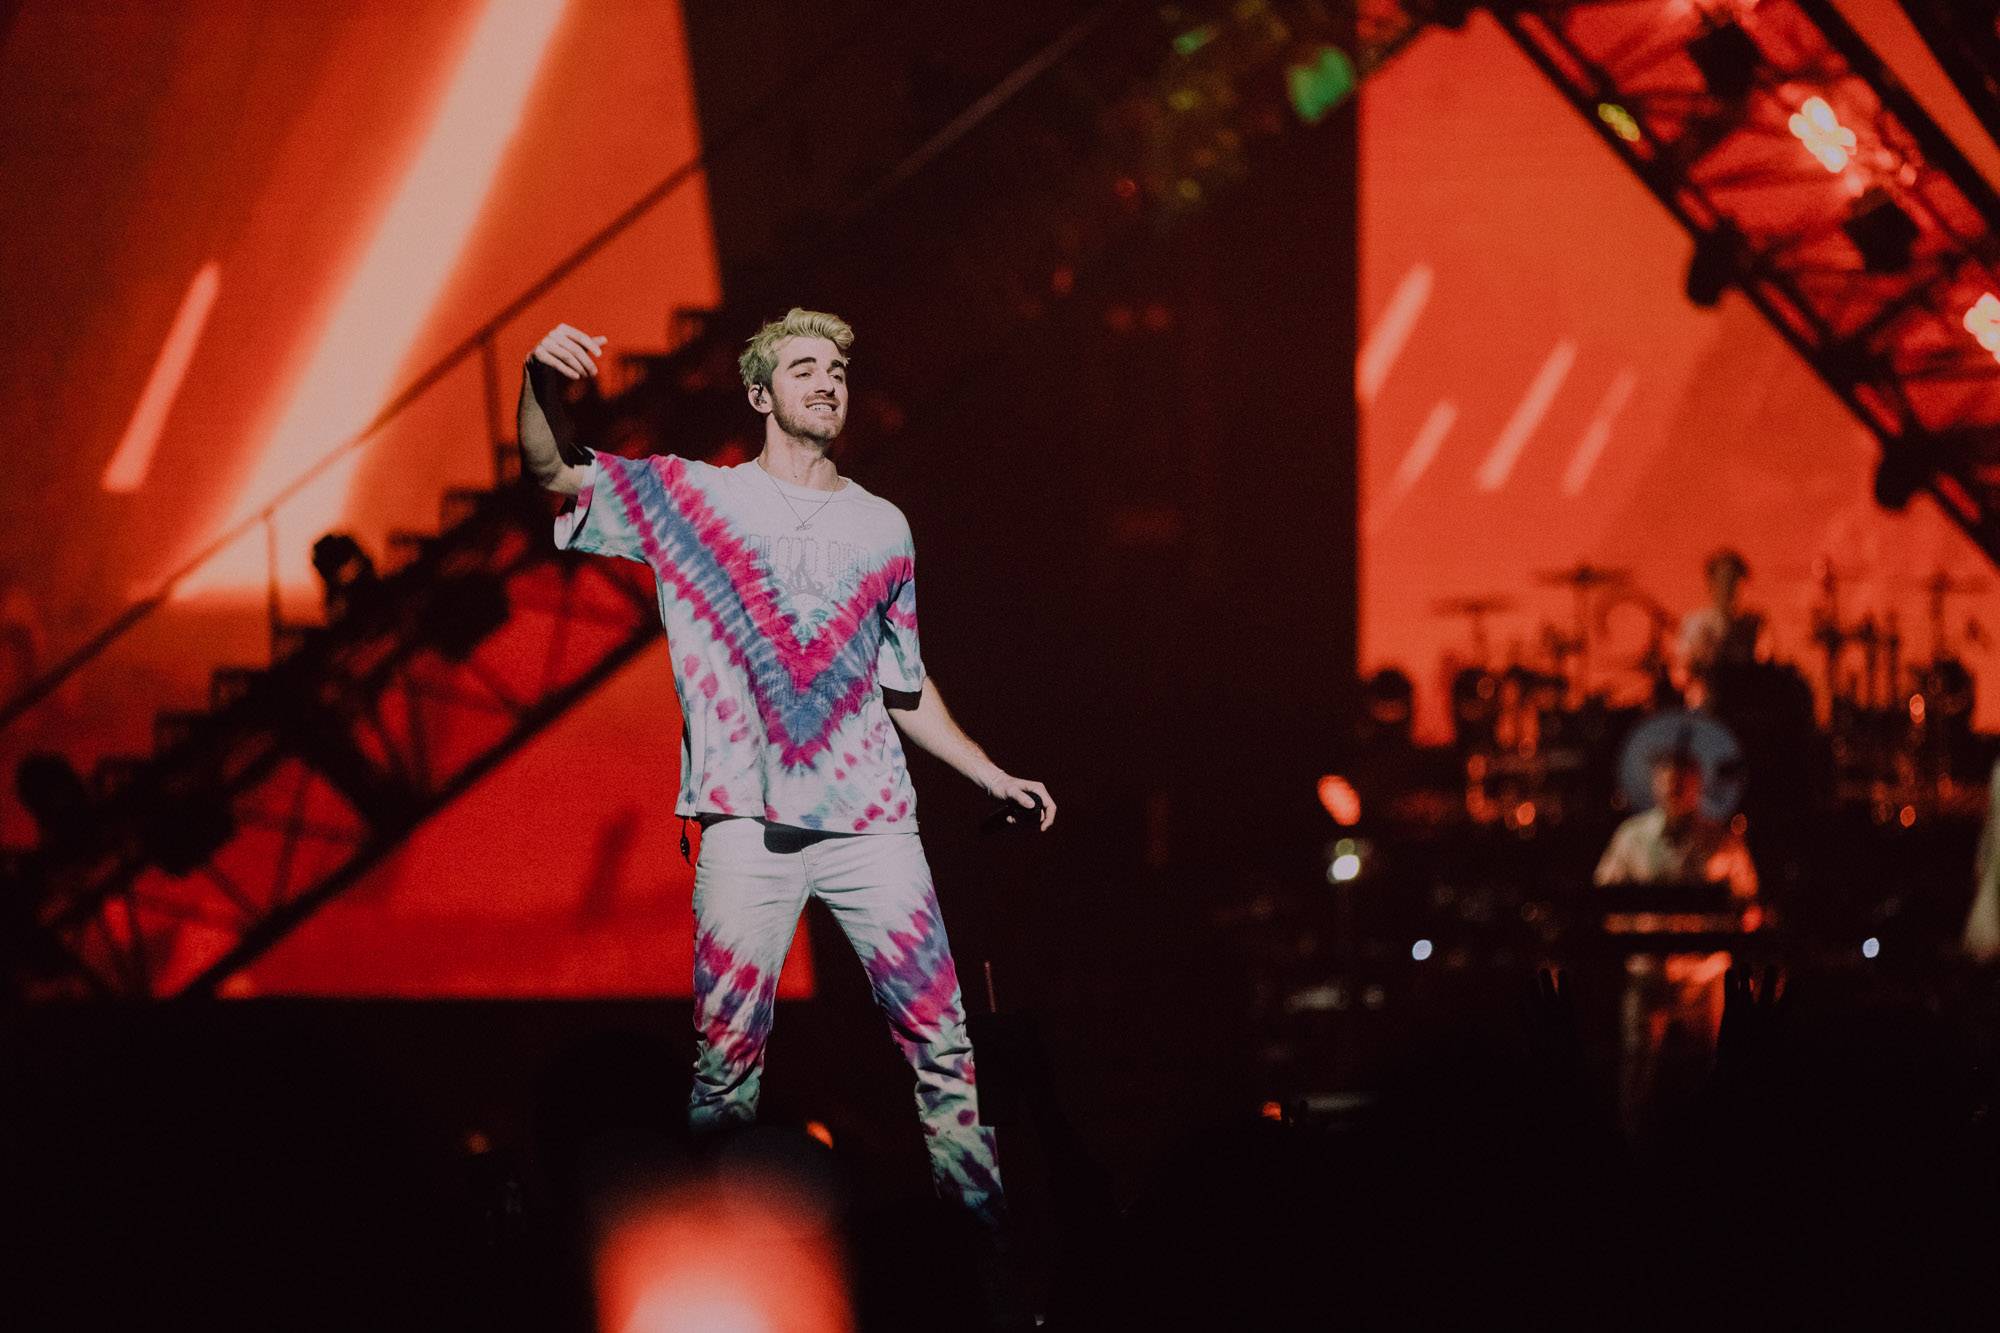 The Chainsmokers at Rogers Arena, Vancouver, Dec 06 2019. Lindsey Blane photo.